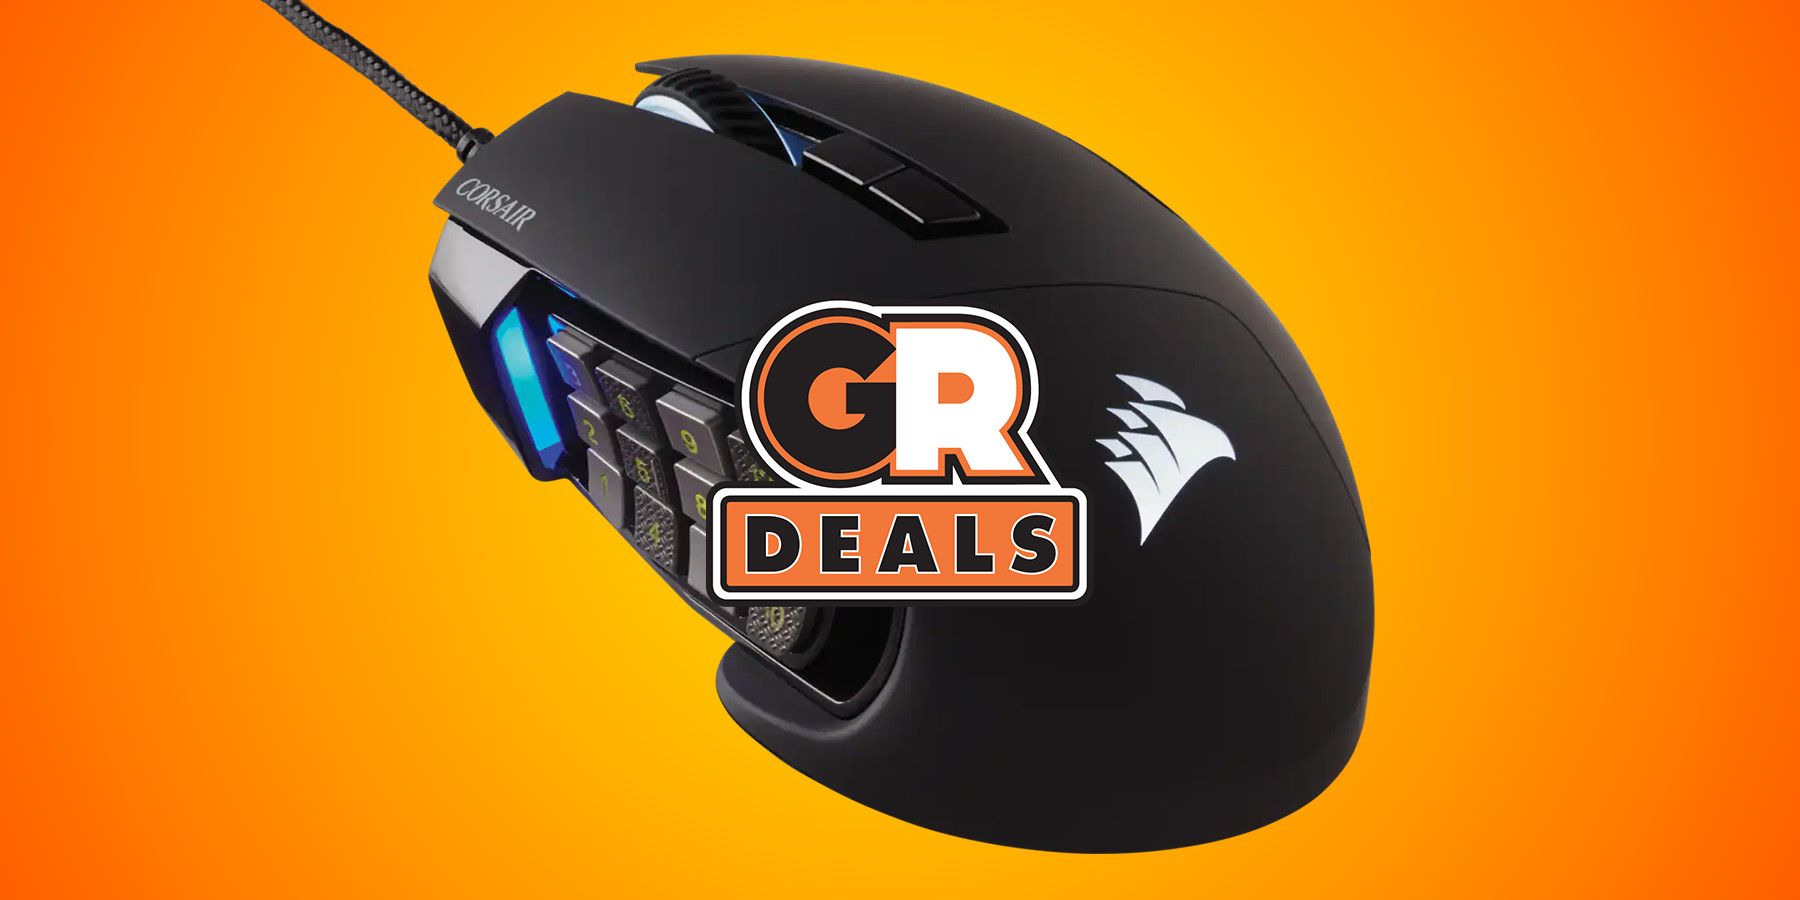 gaming mouse hub discounts sales january